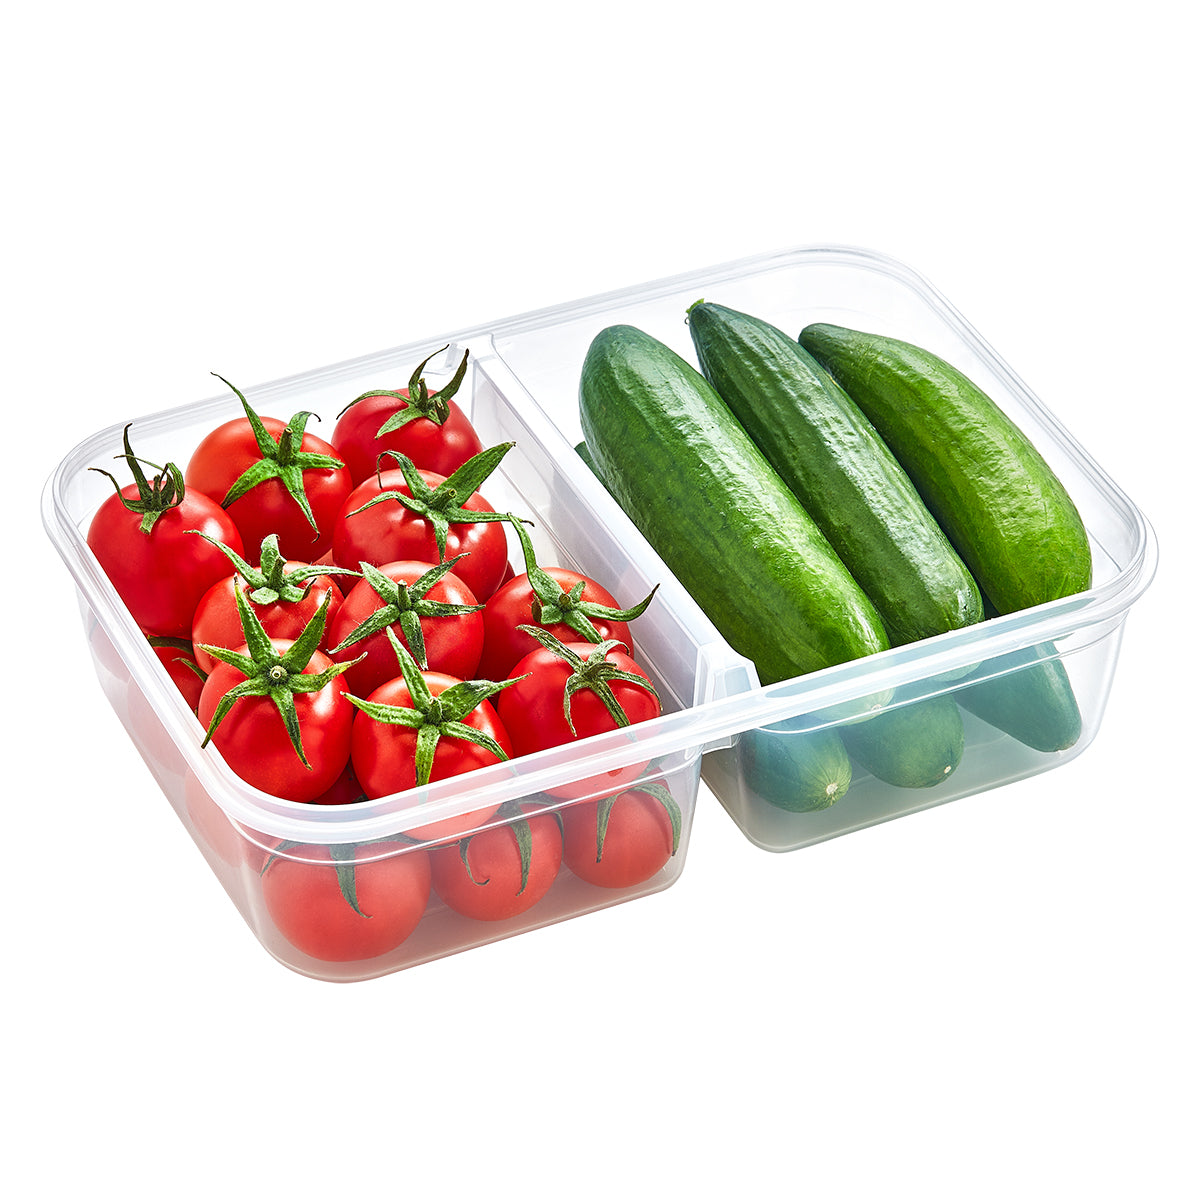 Set of 4 Divided Food Storage Containers Airtight Plastic Containers with Lids